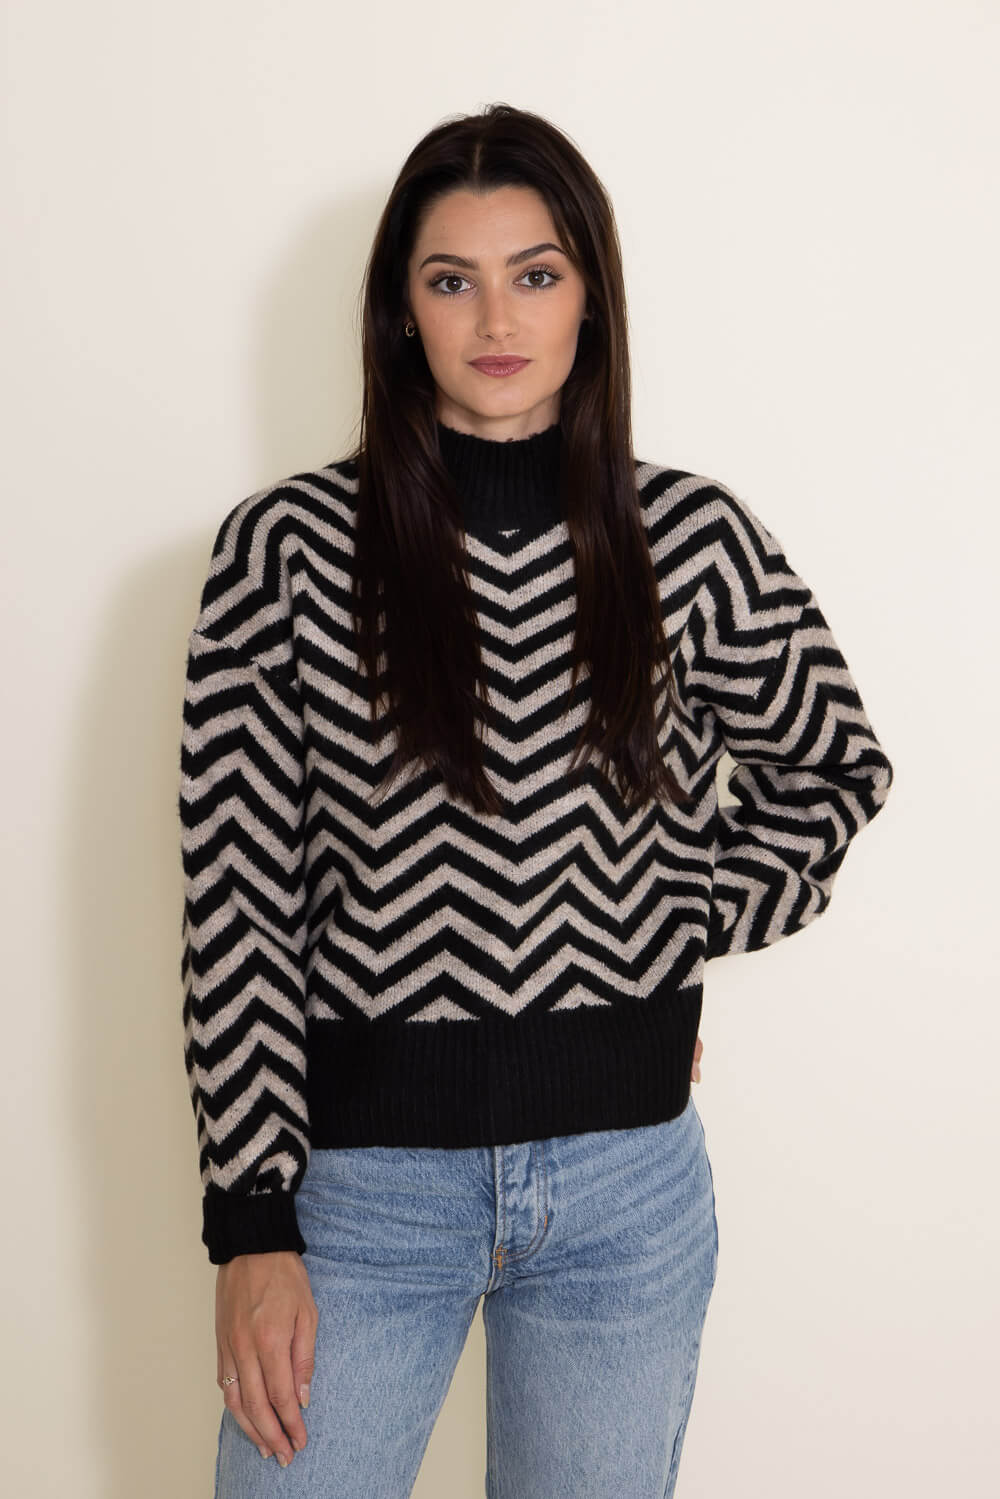 Miracle Chevron Mock Neck Sweater for Women in Black